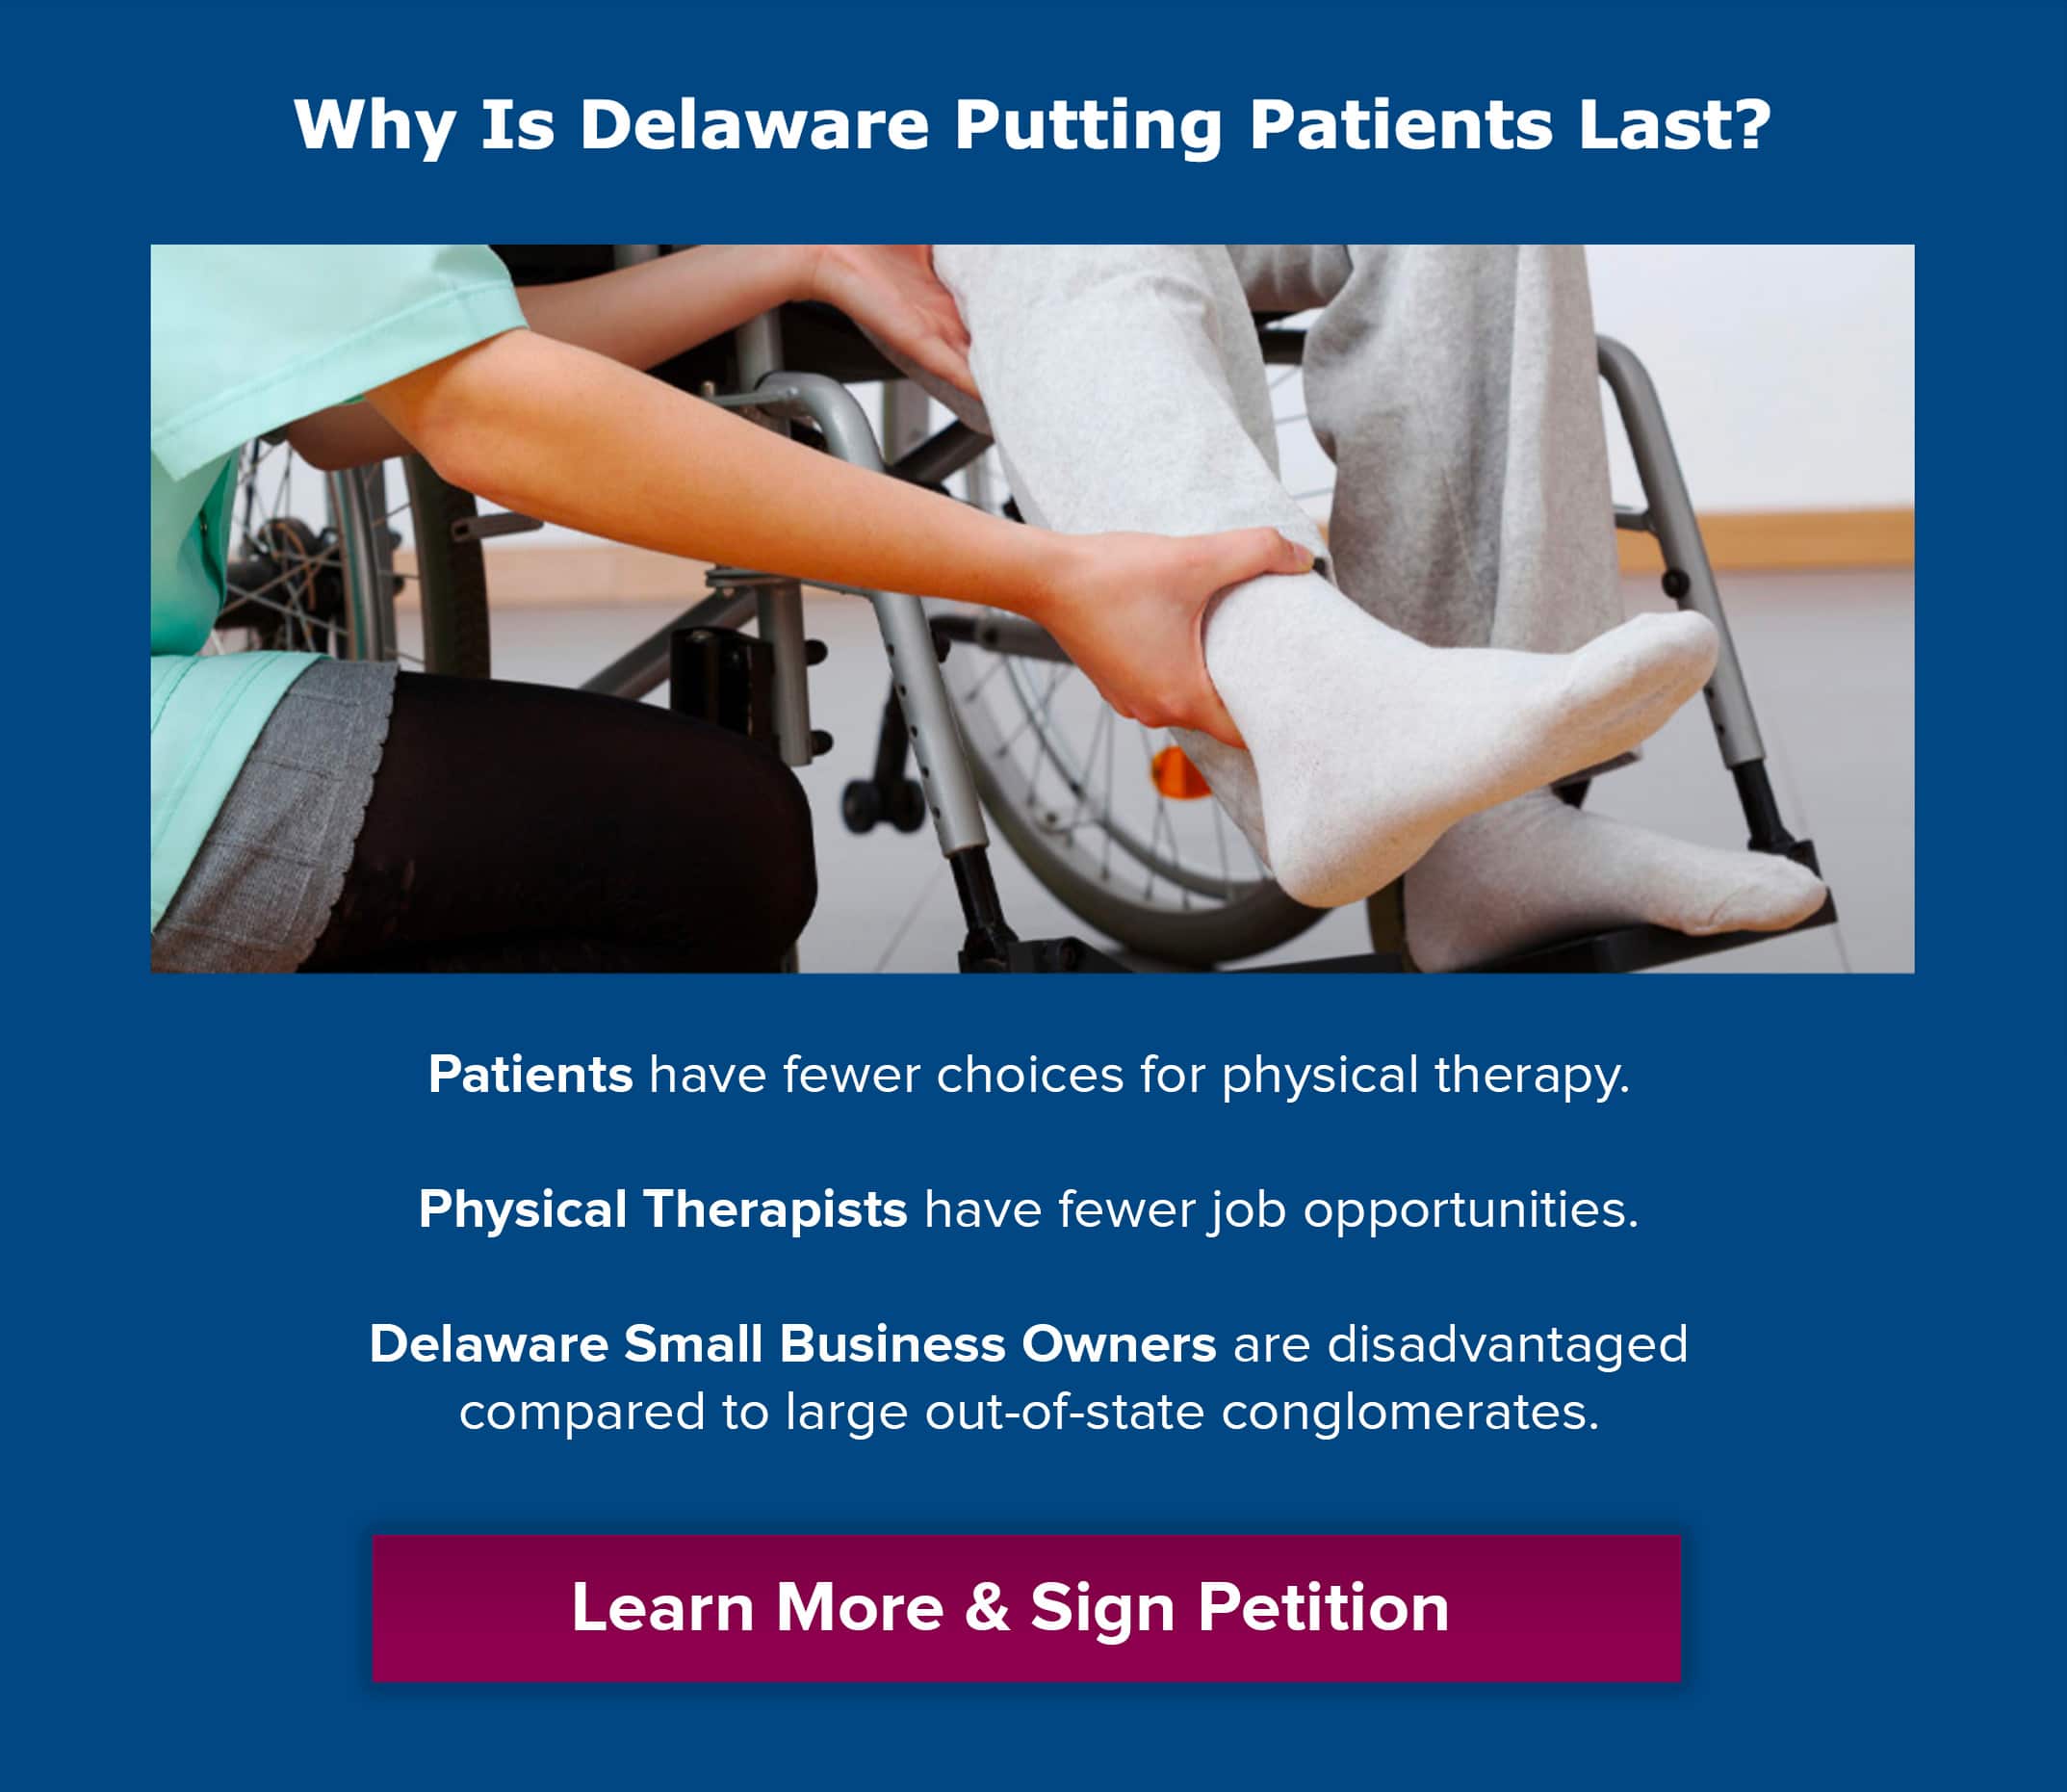 Why is Delaware Putting Patients Last?